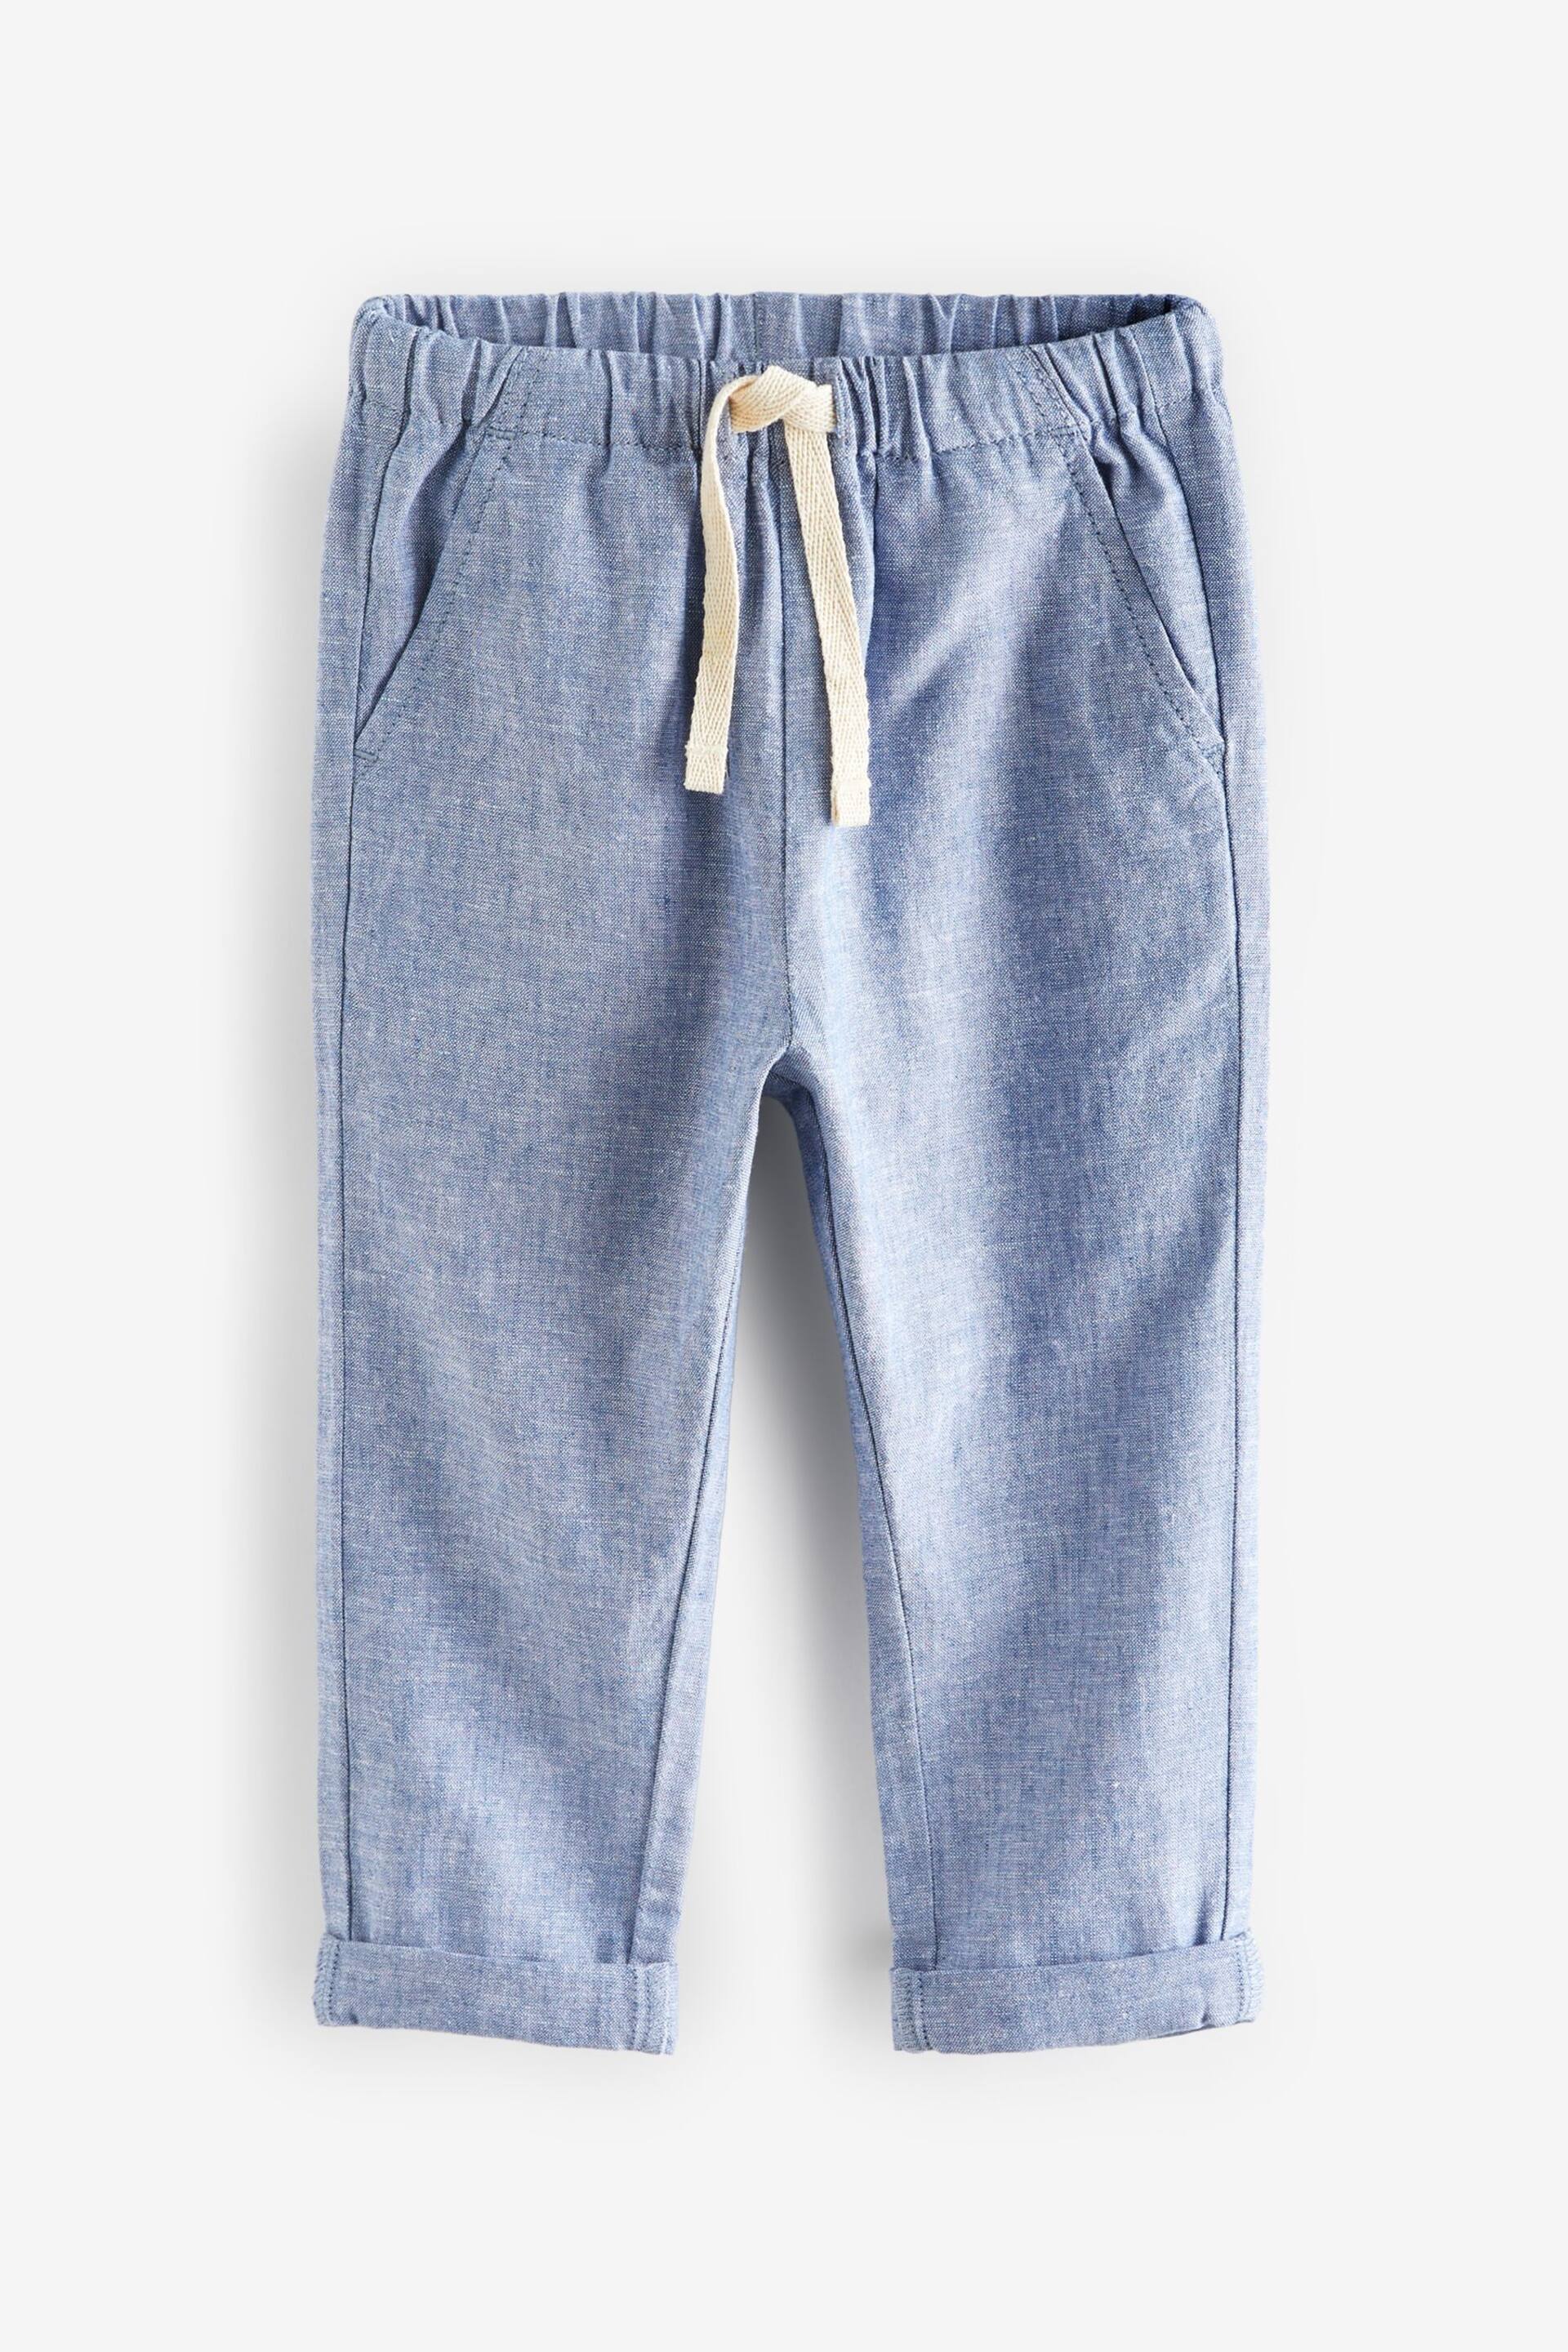 Chambray/White 2 Pack Linen Blend Pull On Trousers (3mths-7yrs) - Image 2 of 5